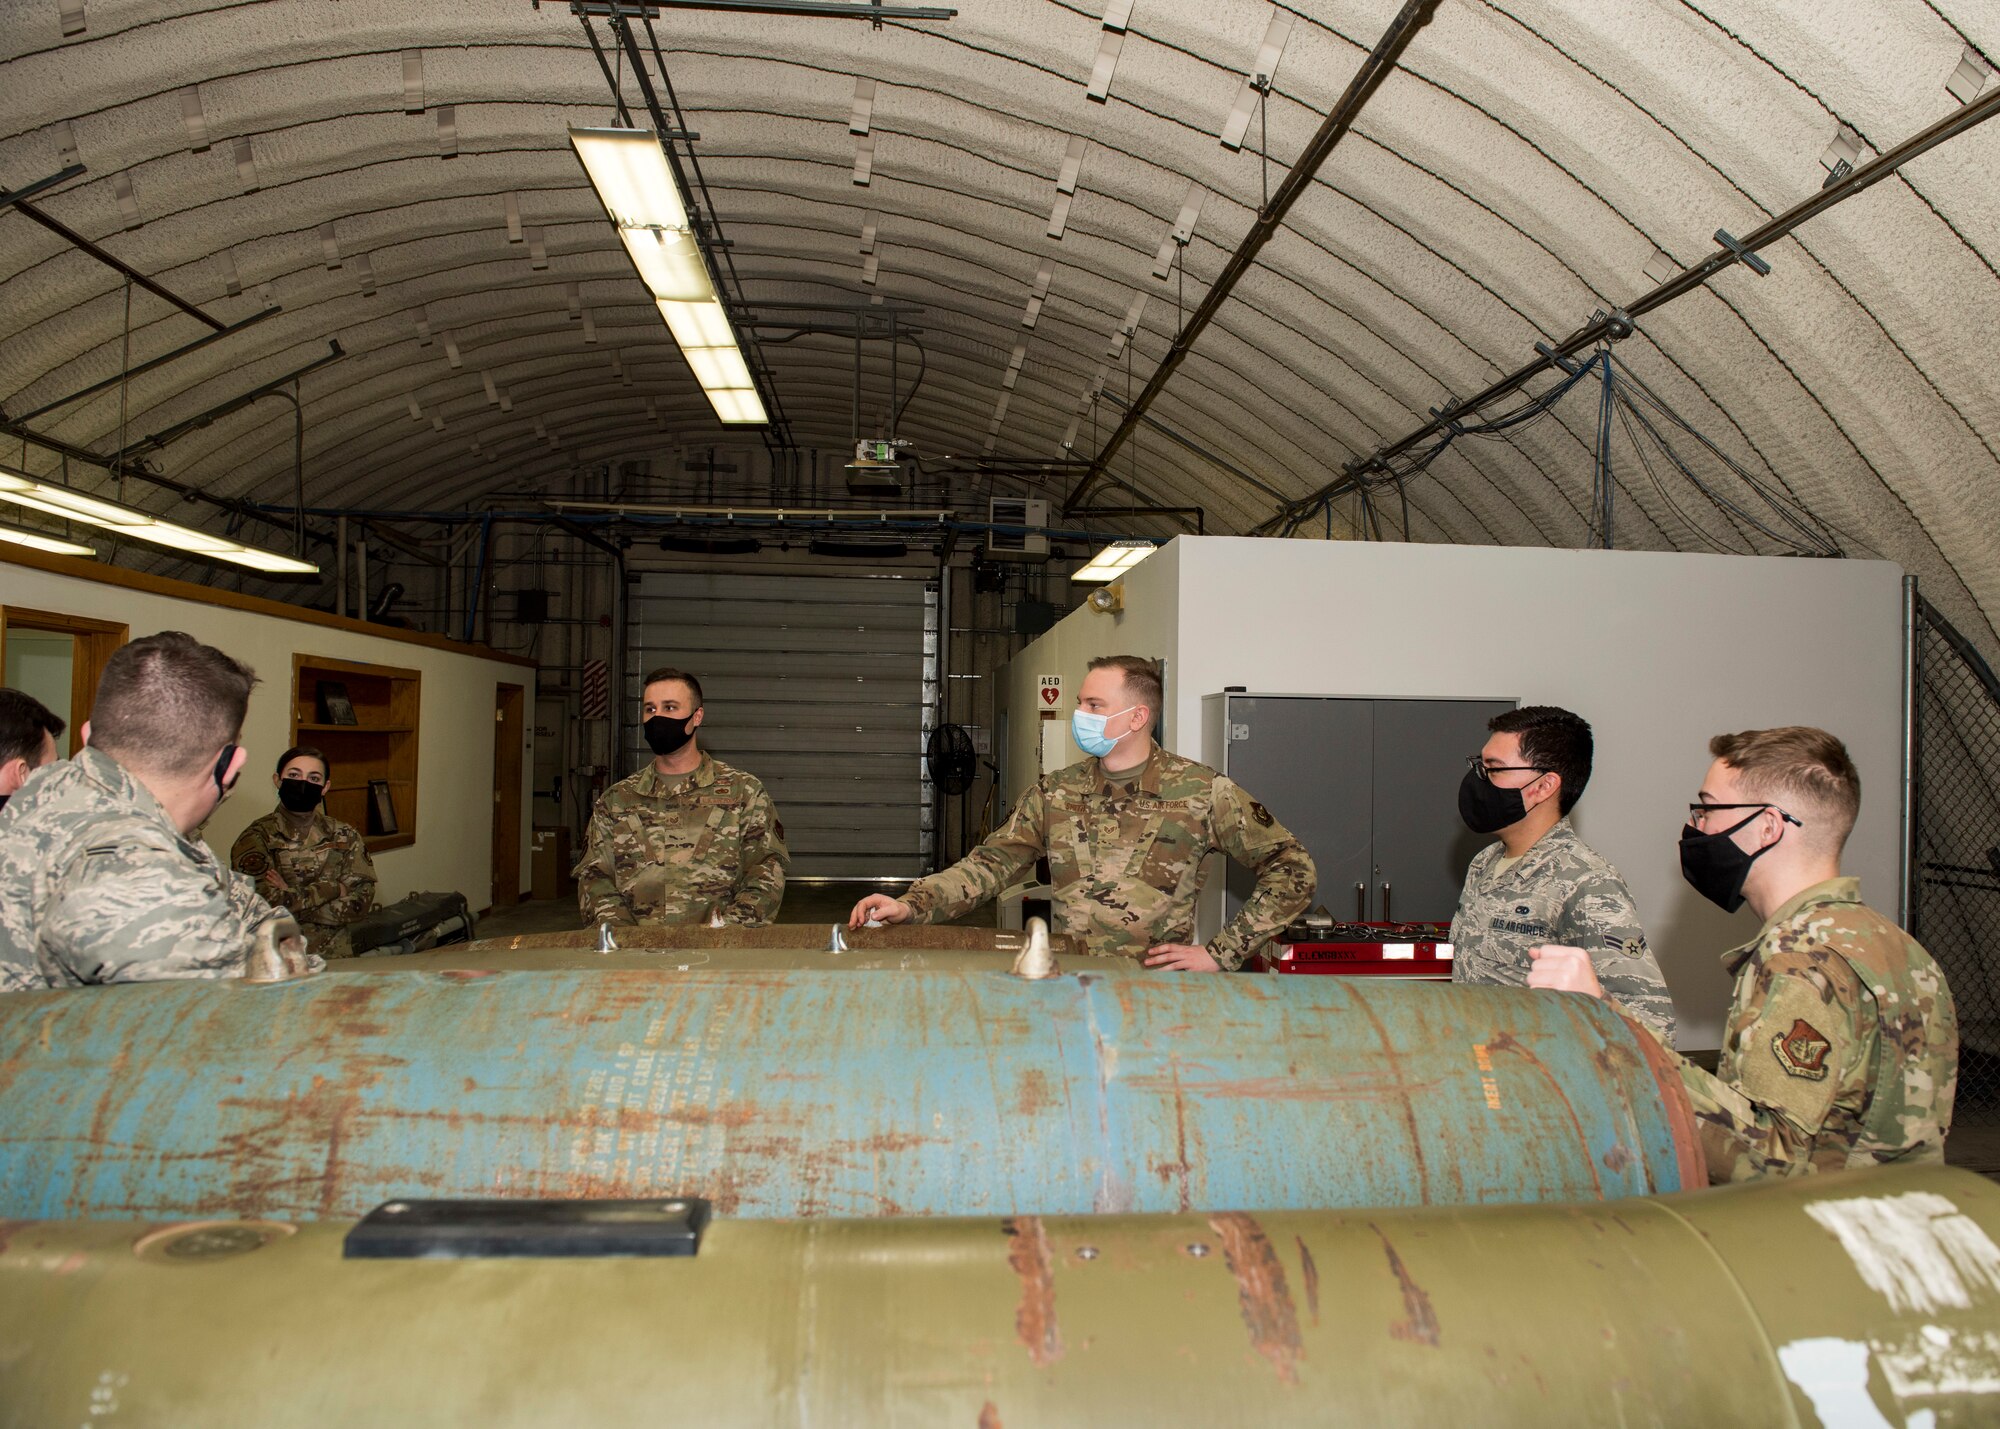 U.S. Air Force Tech. Sgt. Nicholas Kern, fourth from right, the 3rd Munitions Squadron training section chief, teaches a combat munitions training class at Joint Base Elmendorf-Richardson, Alaska, Nov. 5, 2020. Kern revamped his squadron’s training section and implemented an expanded CMT program that familiarizes ammo troops with a variety of munitions in one location.